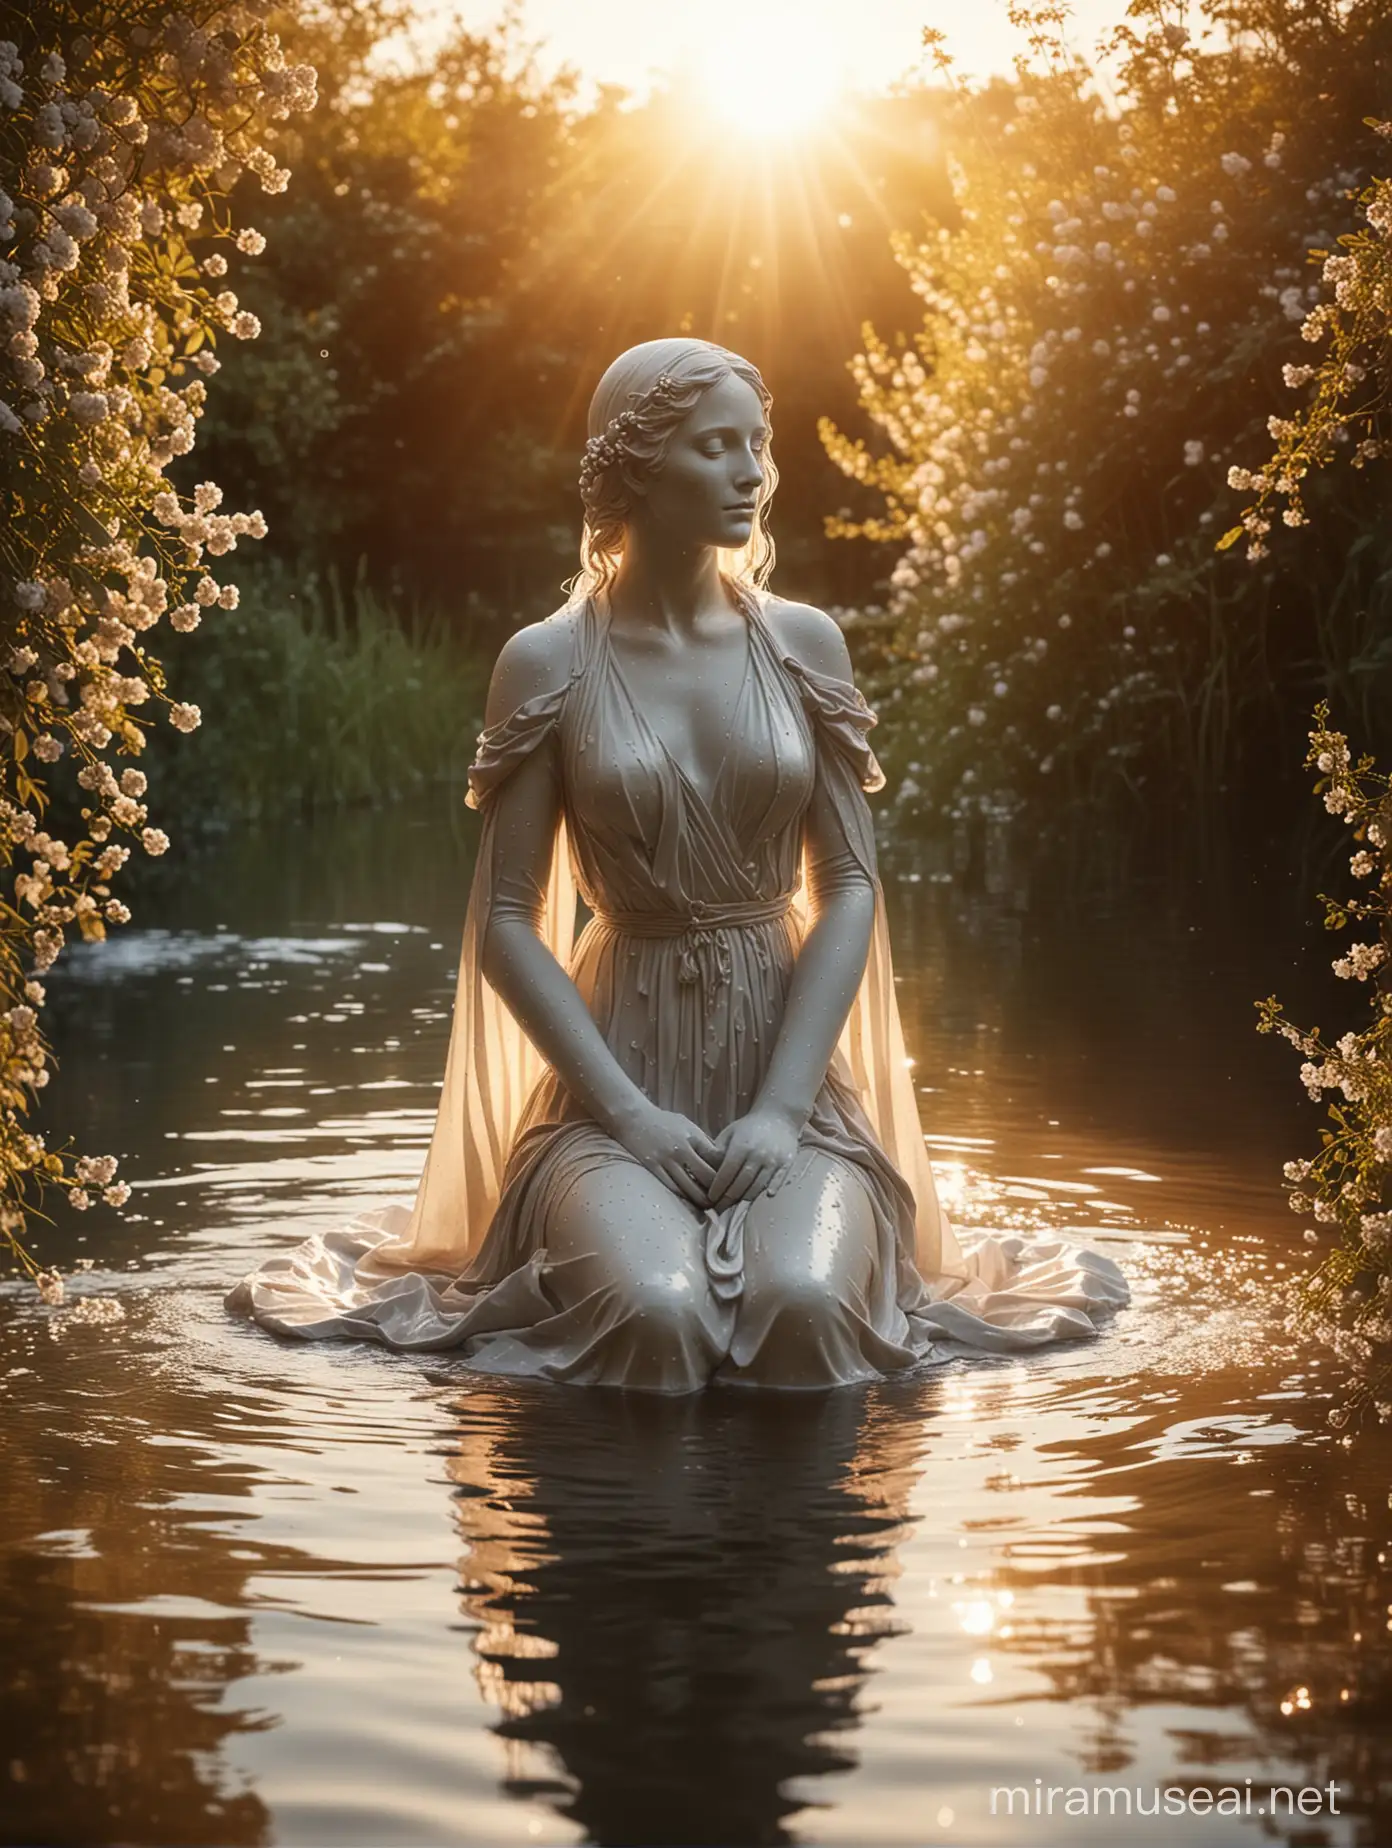 Serene Woman Sculpture Sitting in Water at Sunset with Berry Flowers